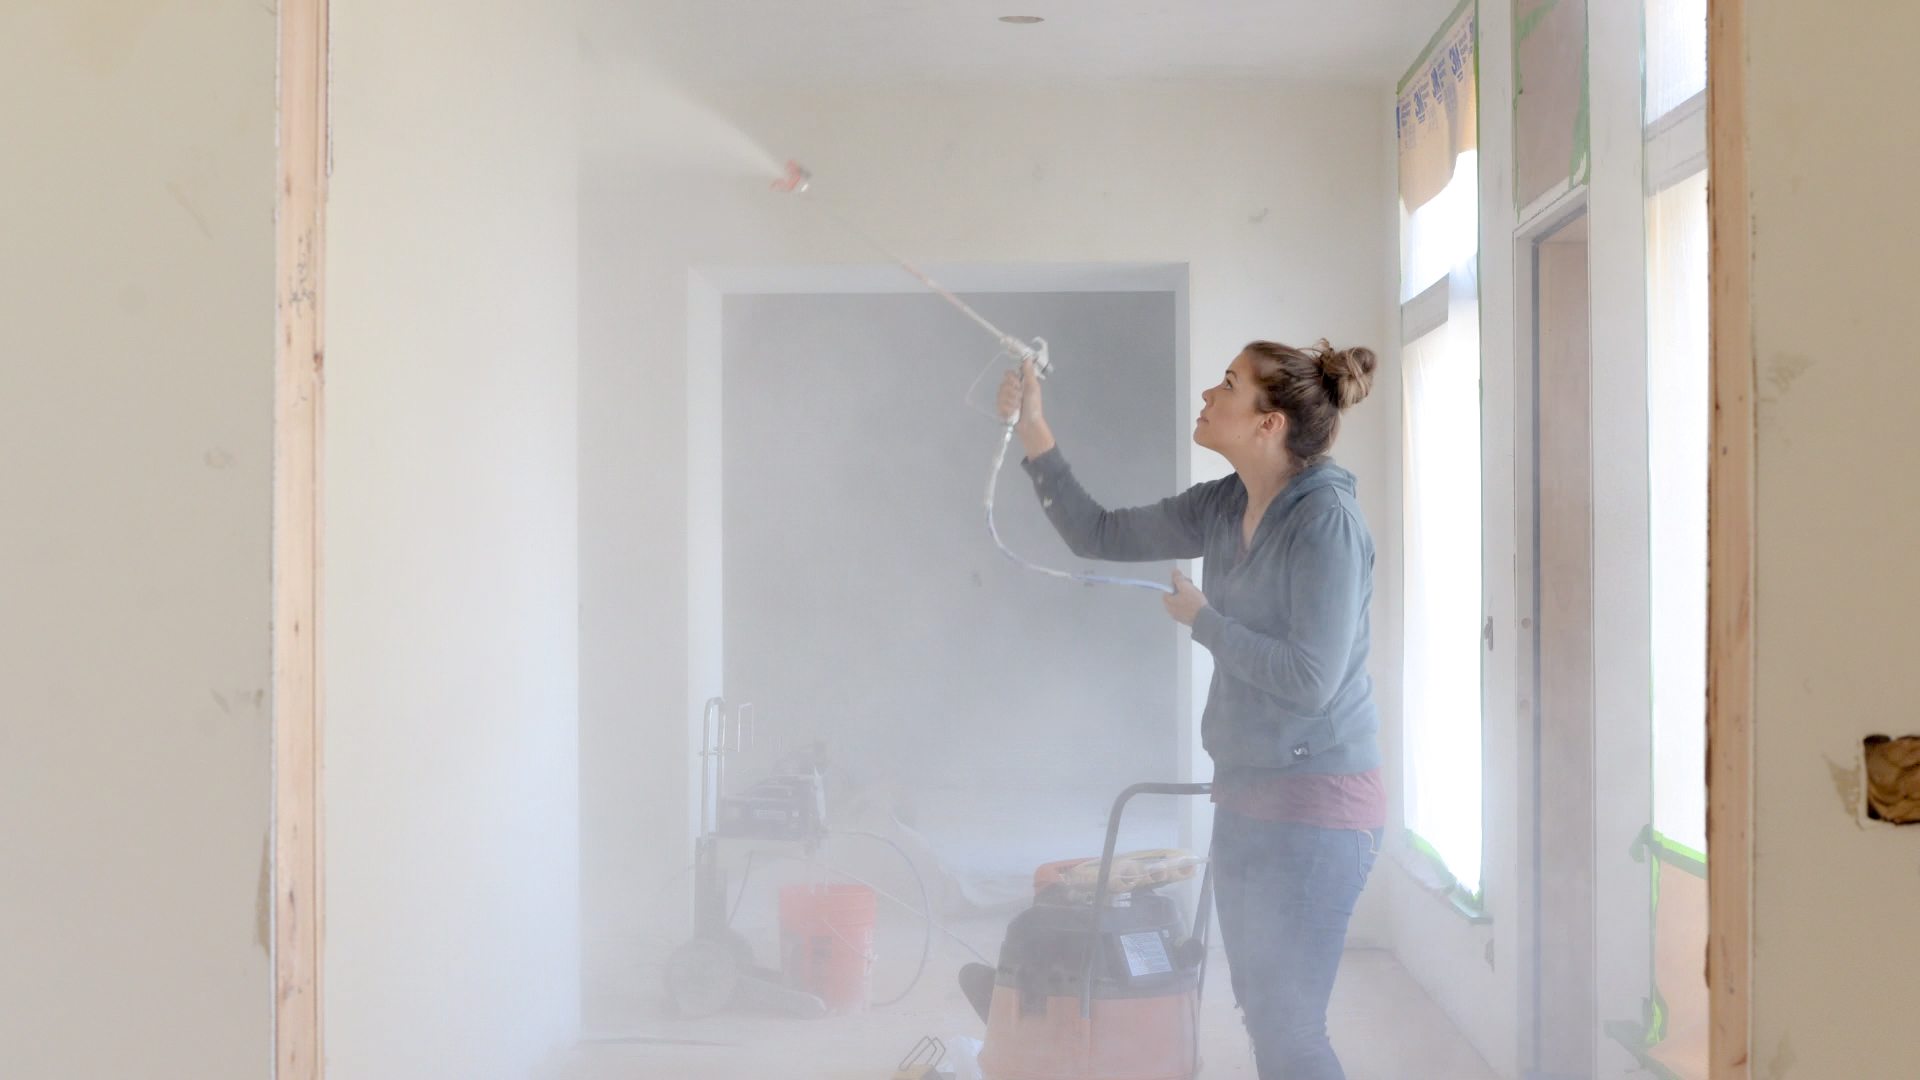 Drywall Dust Removal That Most, How To Clean Plaster Dust From Hardwood Floors